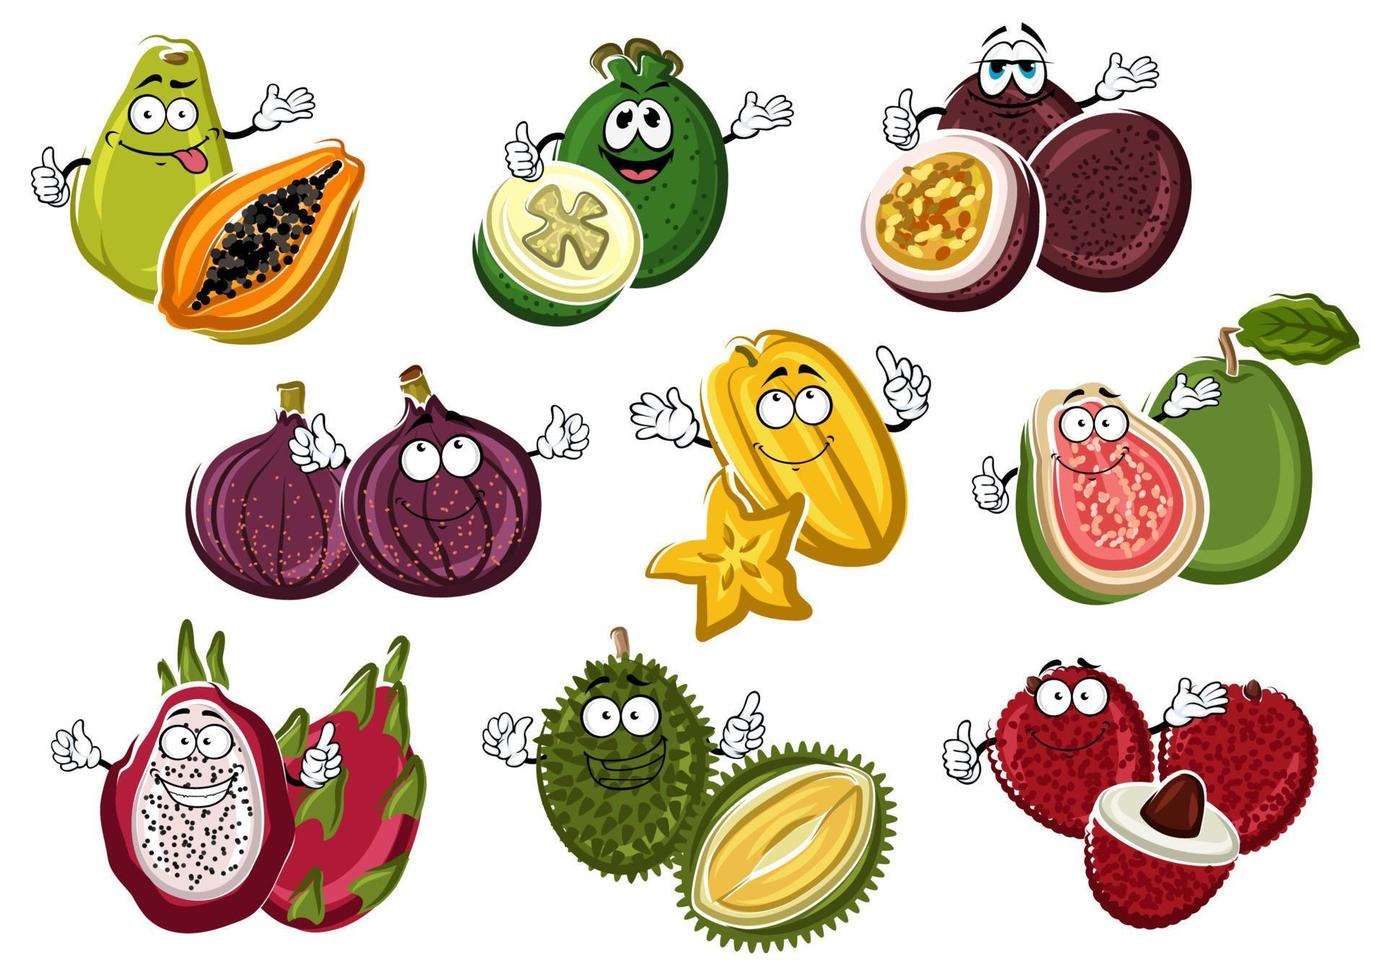 Smiling and happy cartoon fruits with hands vector